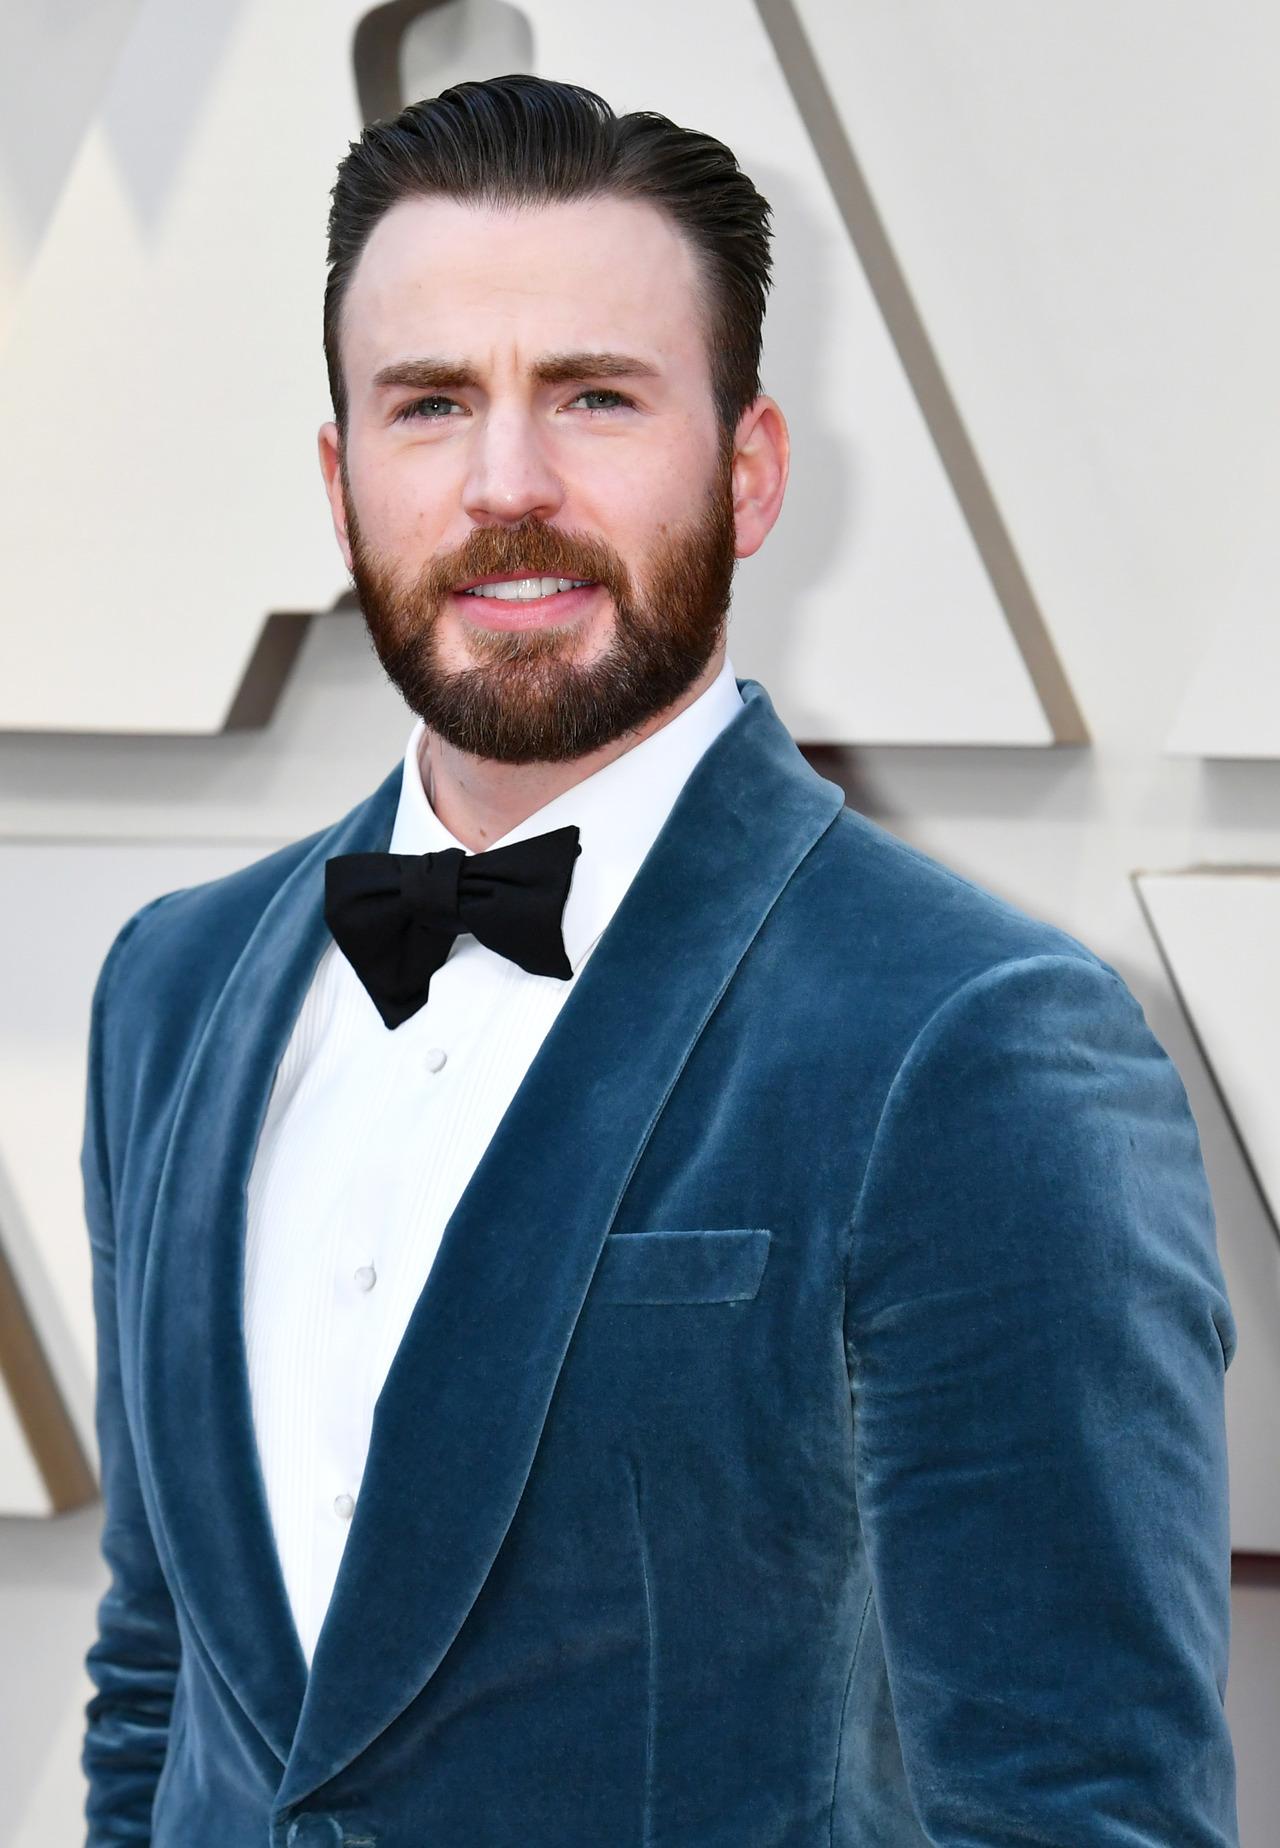 Chris Evans image Chris Evans at the 2019 Academy Awards February